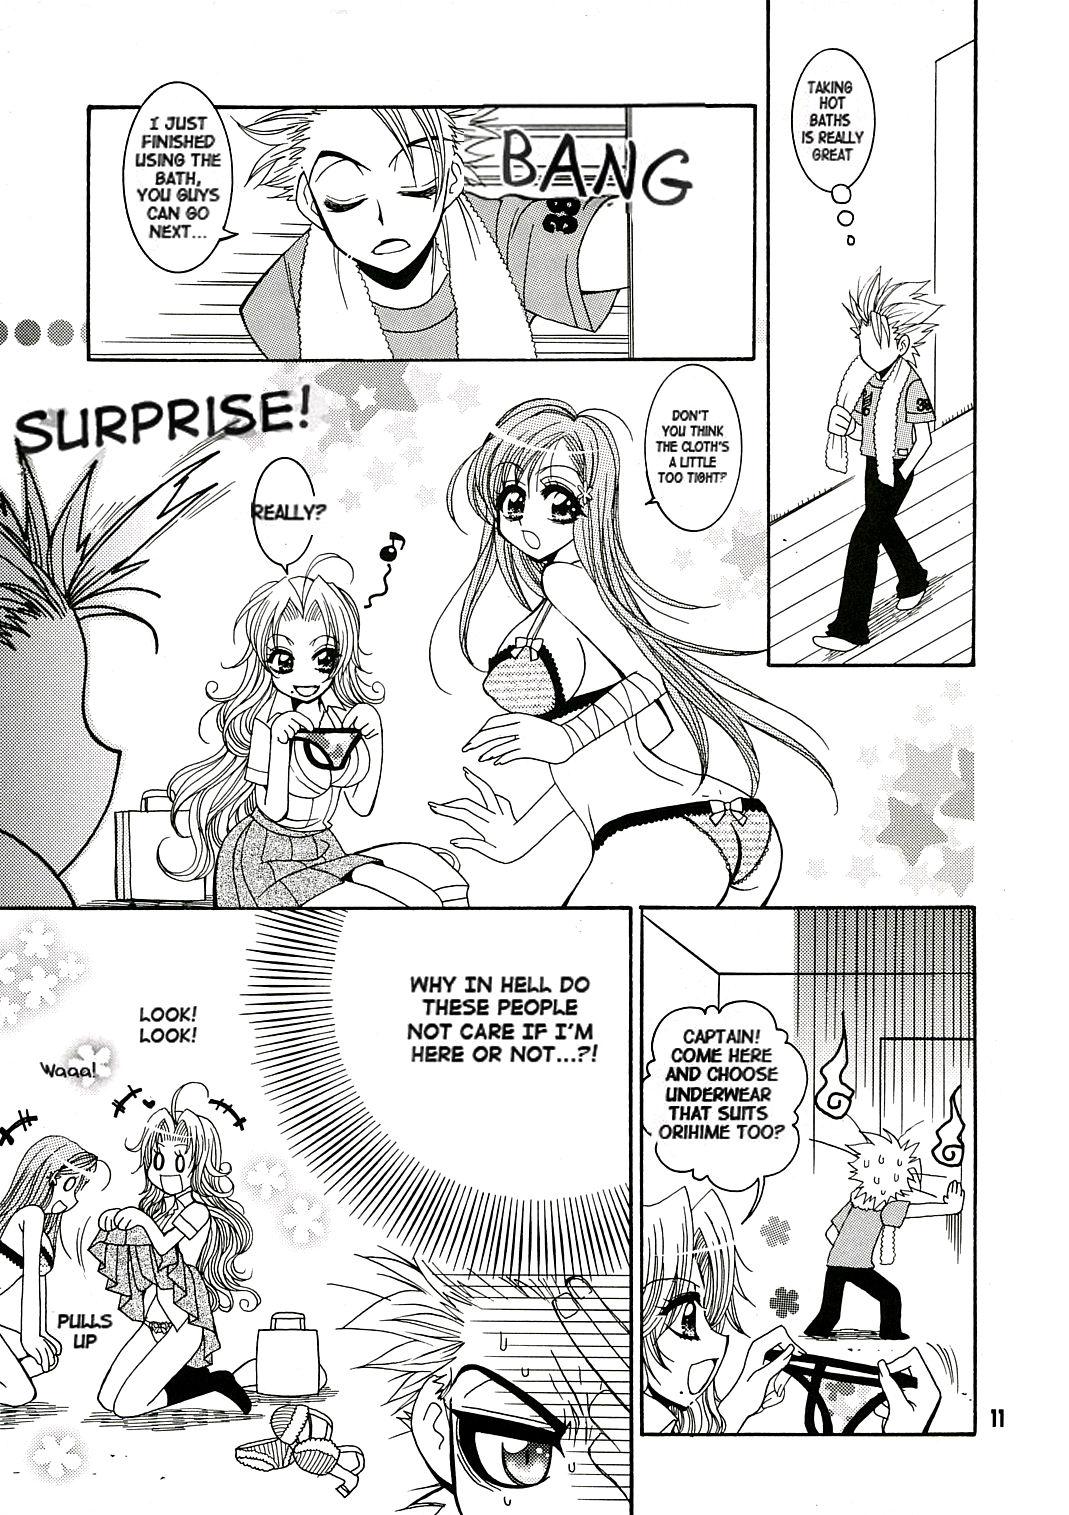 Cougars BABY BLUE! - Bleach Branquinha - Page 10